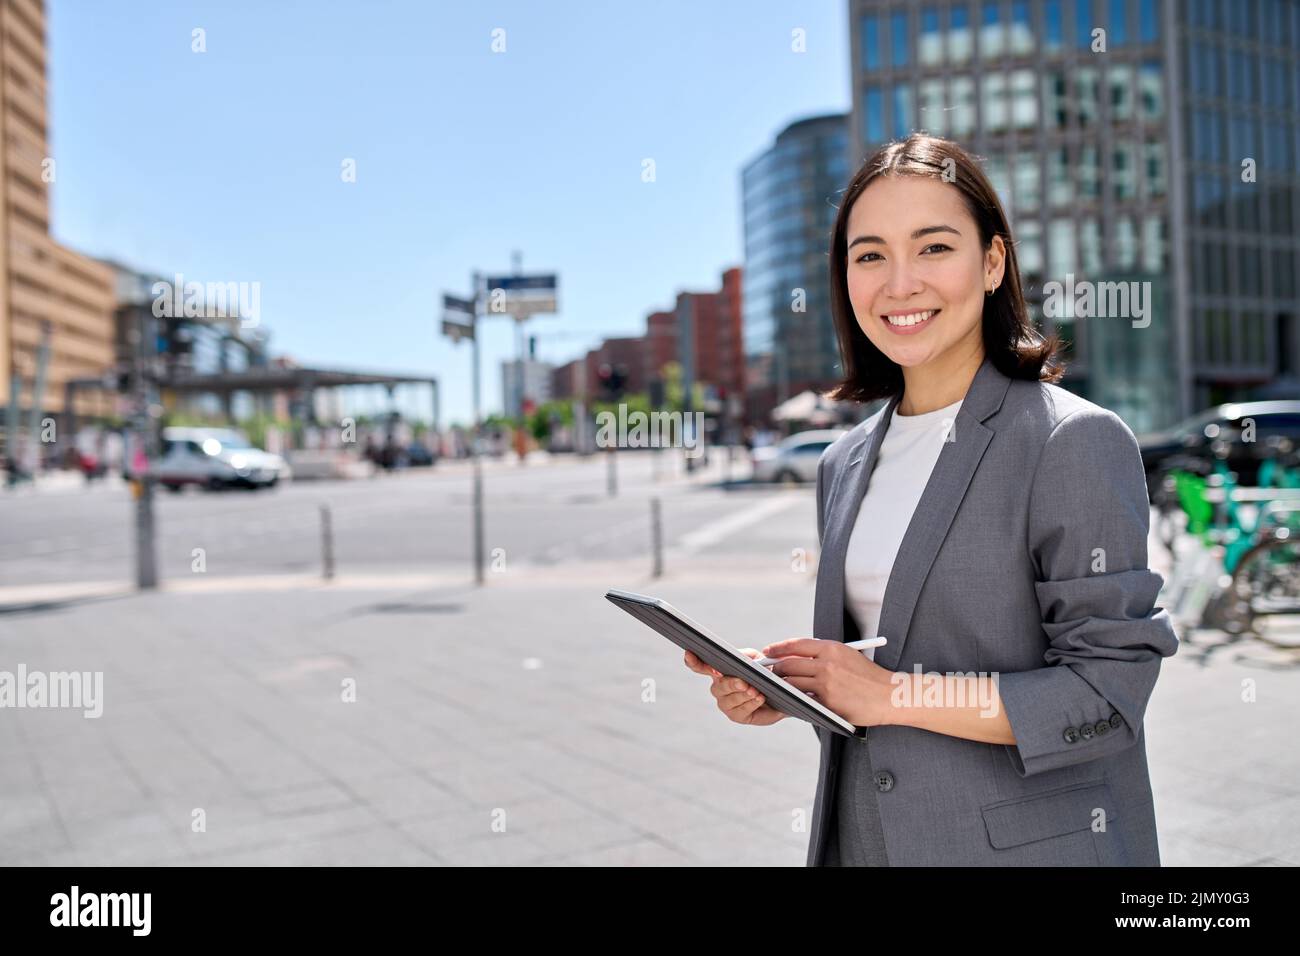 Smiling young Asian business woman standing on city street using digital tablet. Stock Photo